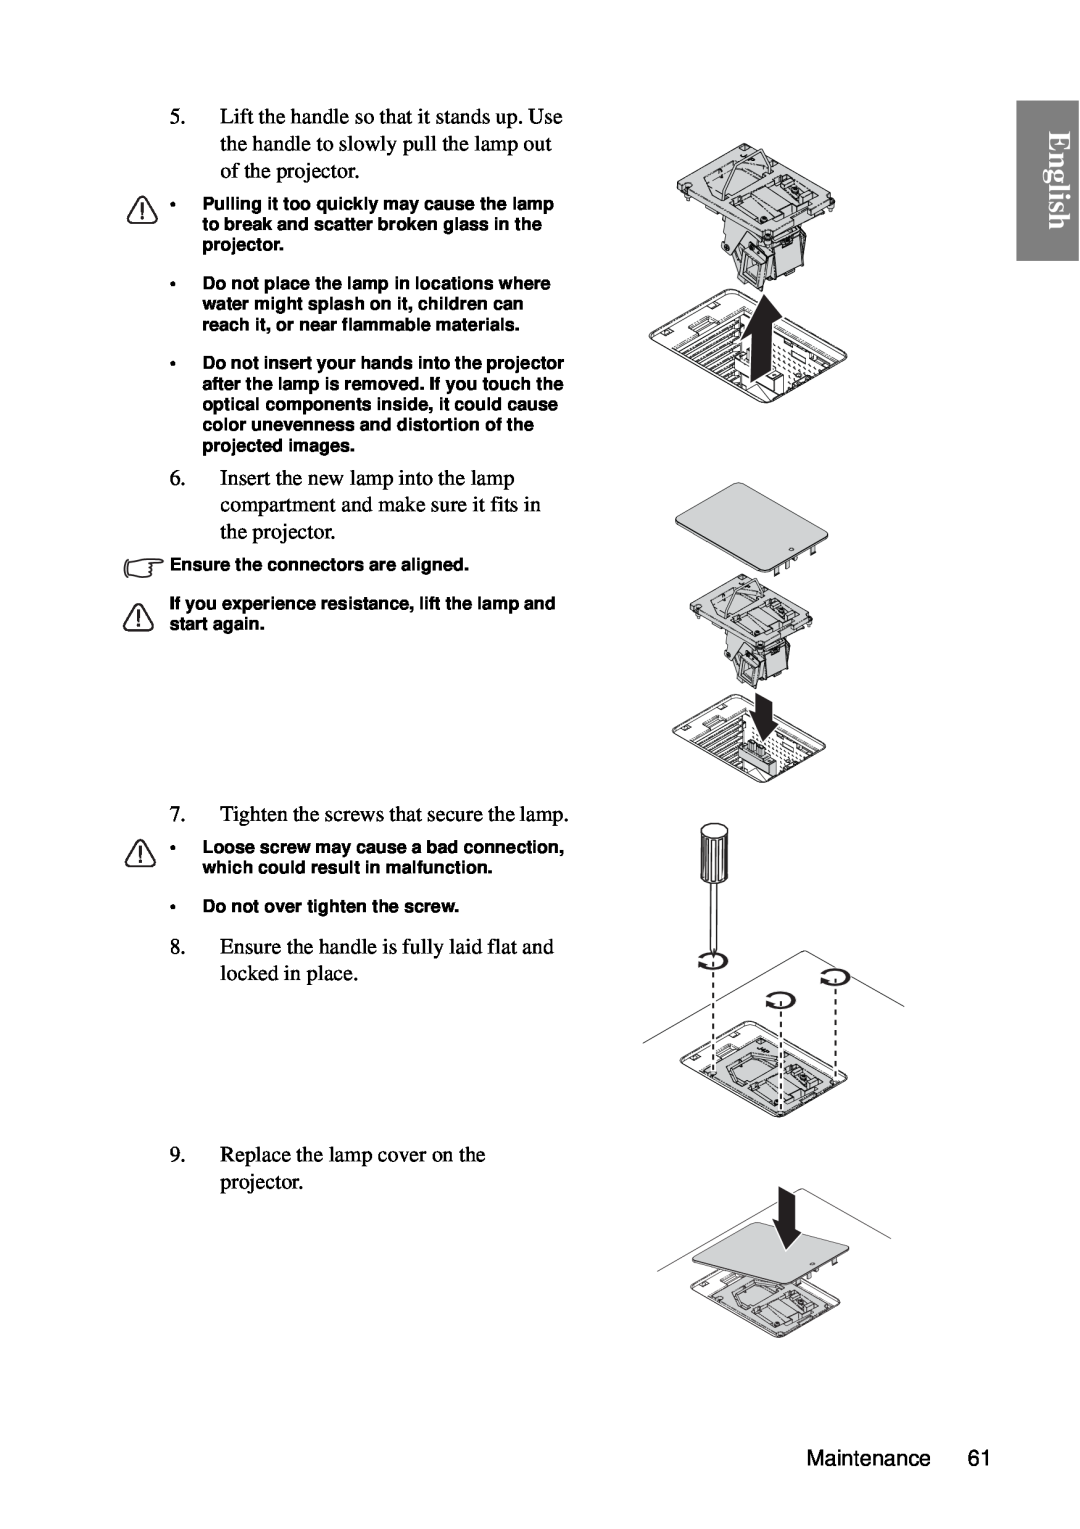 BenQ MP727, MP735 user manual English, Tighten the screws that secure the lamp 